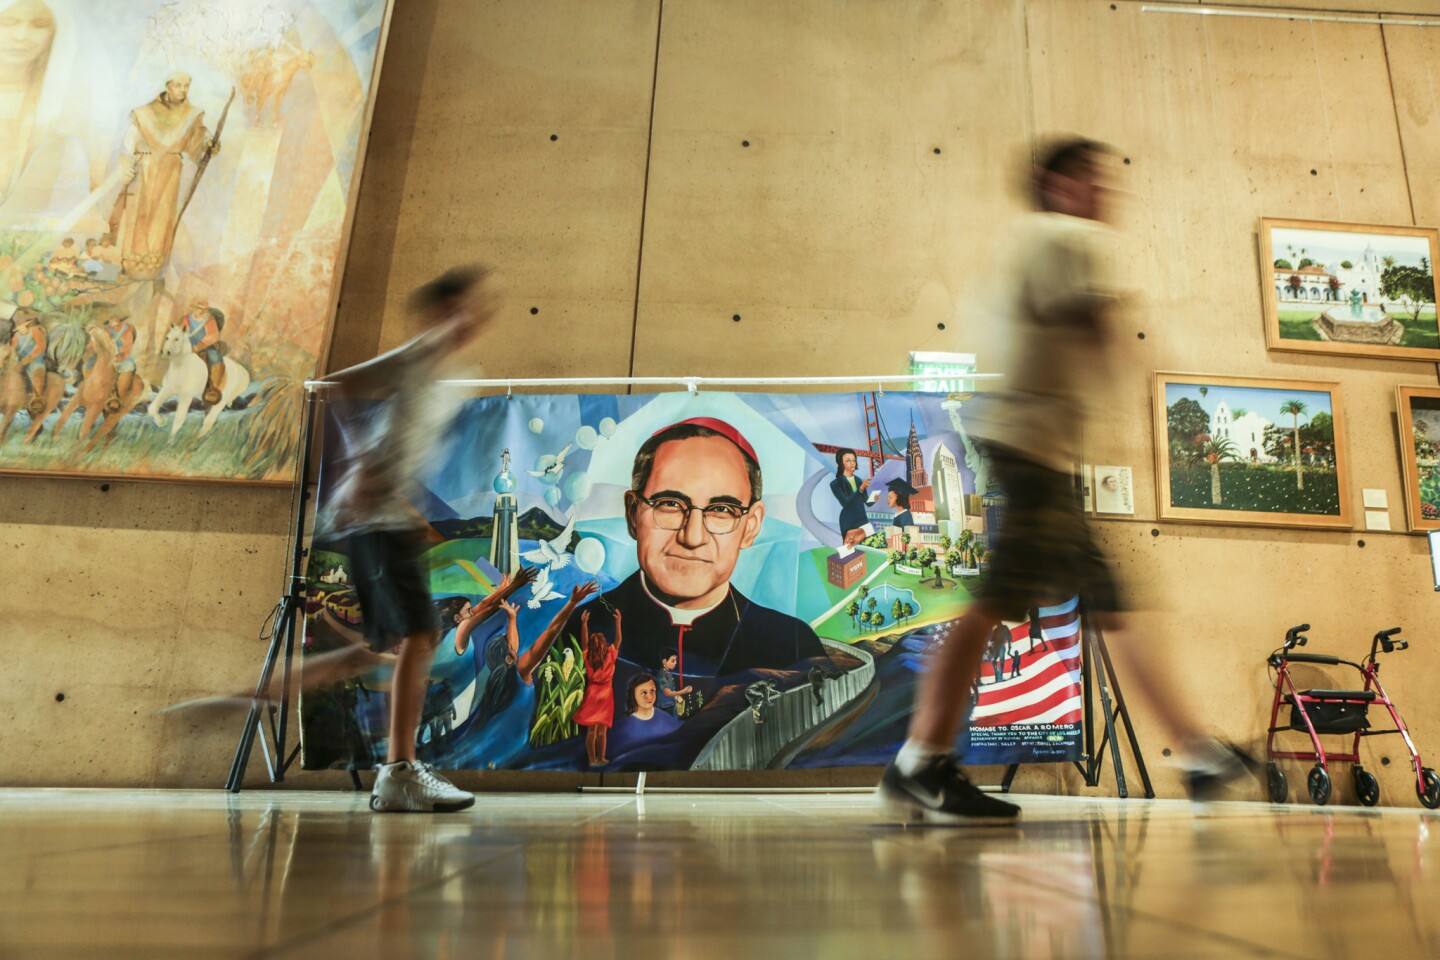 An art installation of Archbishop Oscar Romero is displayed in the hall of the Cathedral of Our Lady of the Angels in downtown Los Angeles, where a special Mass was said for the priest who was assassinated in 1980.